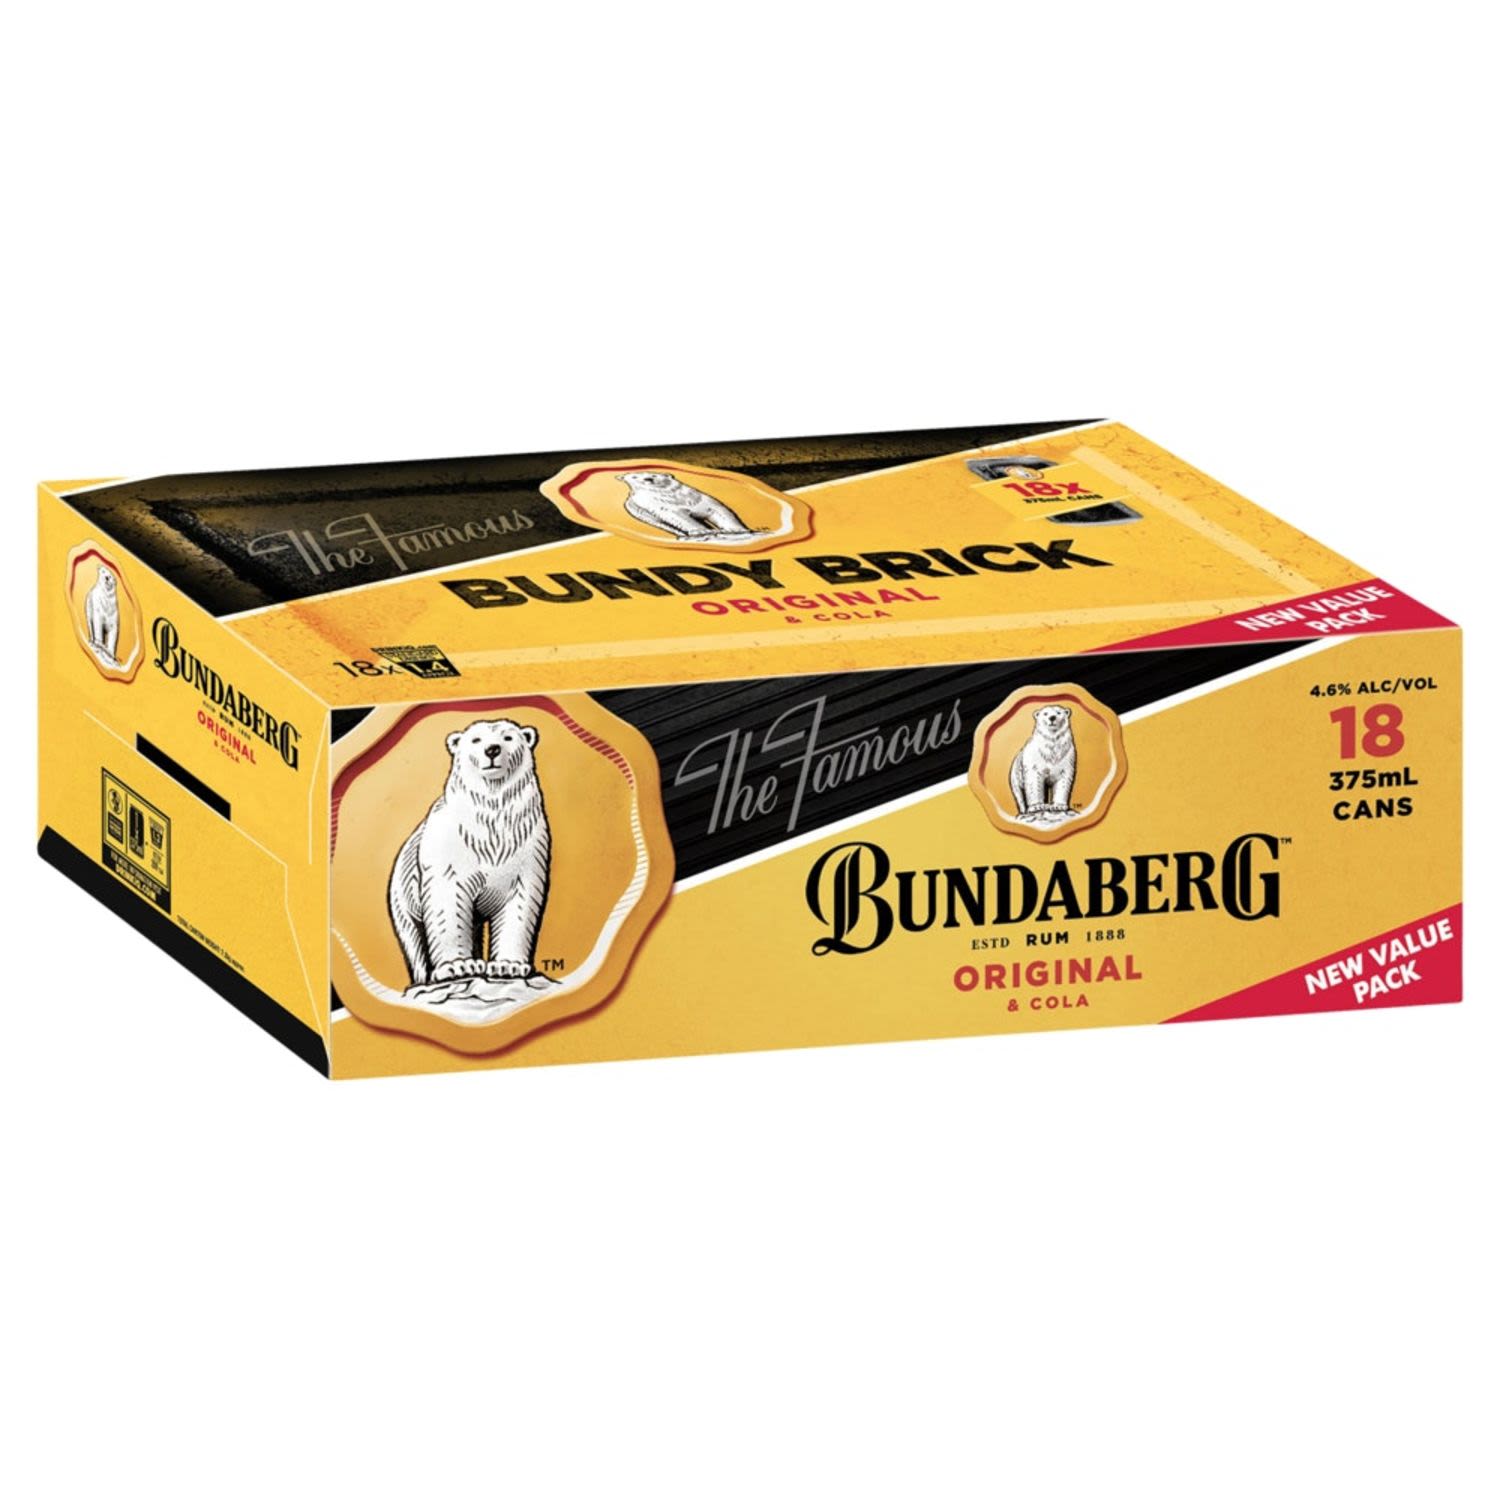 A smooth, well-rounded oak flavour with a distinctive woody aroma mixed with a distinctively smooth caramel flavour, with subtle hints of sweet toffee and butterscotch notes.<br /> <br />Alcohol Volume: 4.60%<br /><br />Pack Format: 18 Pack<br /><br />Standard Drinks: 1.4</br /><br />Pack Type: Can<br />